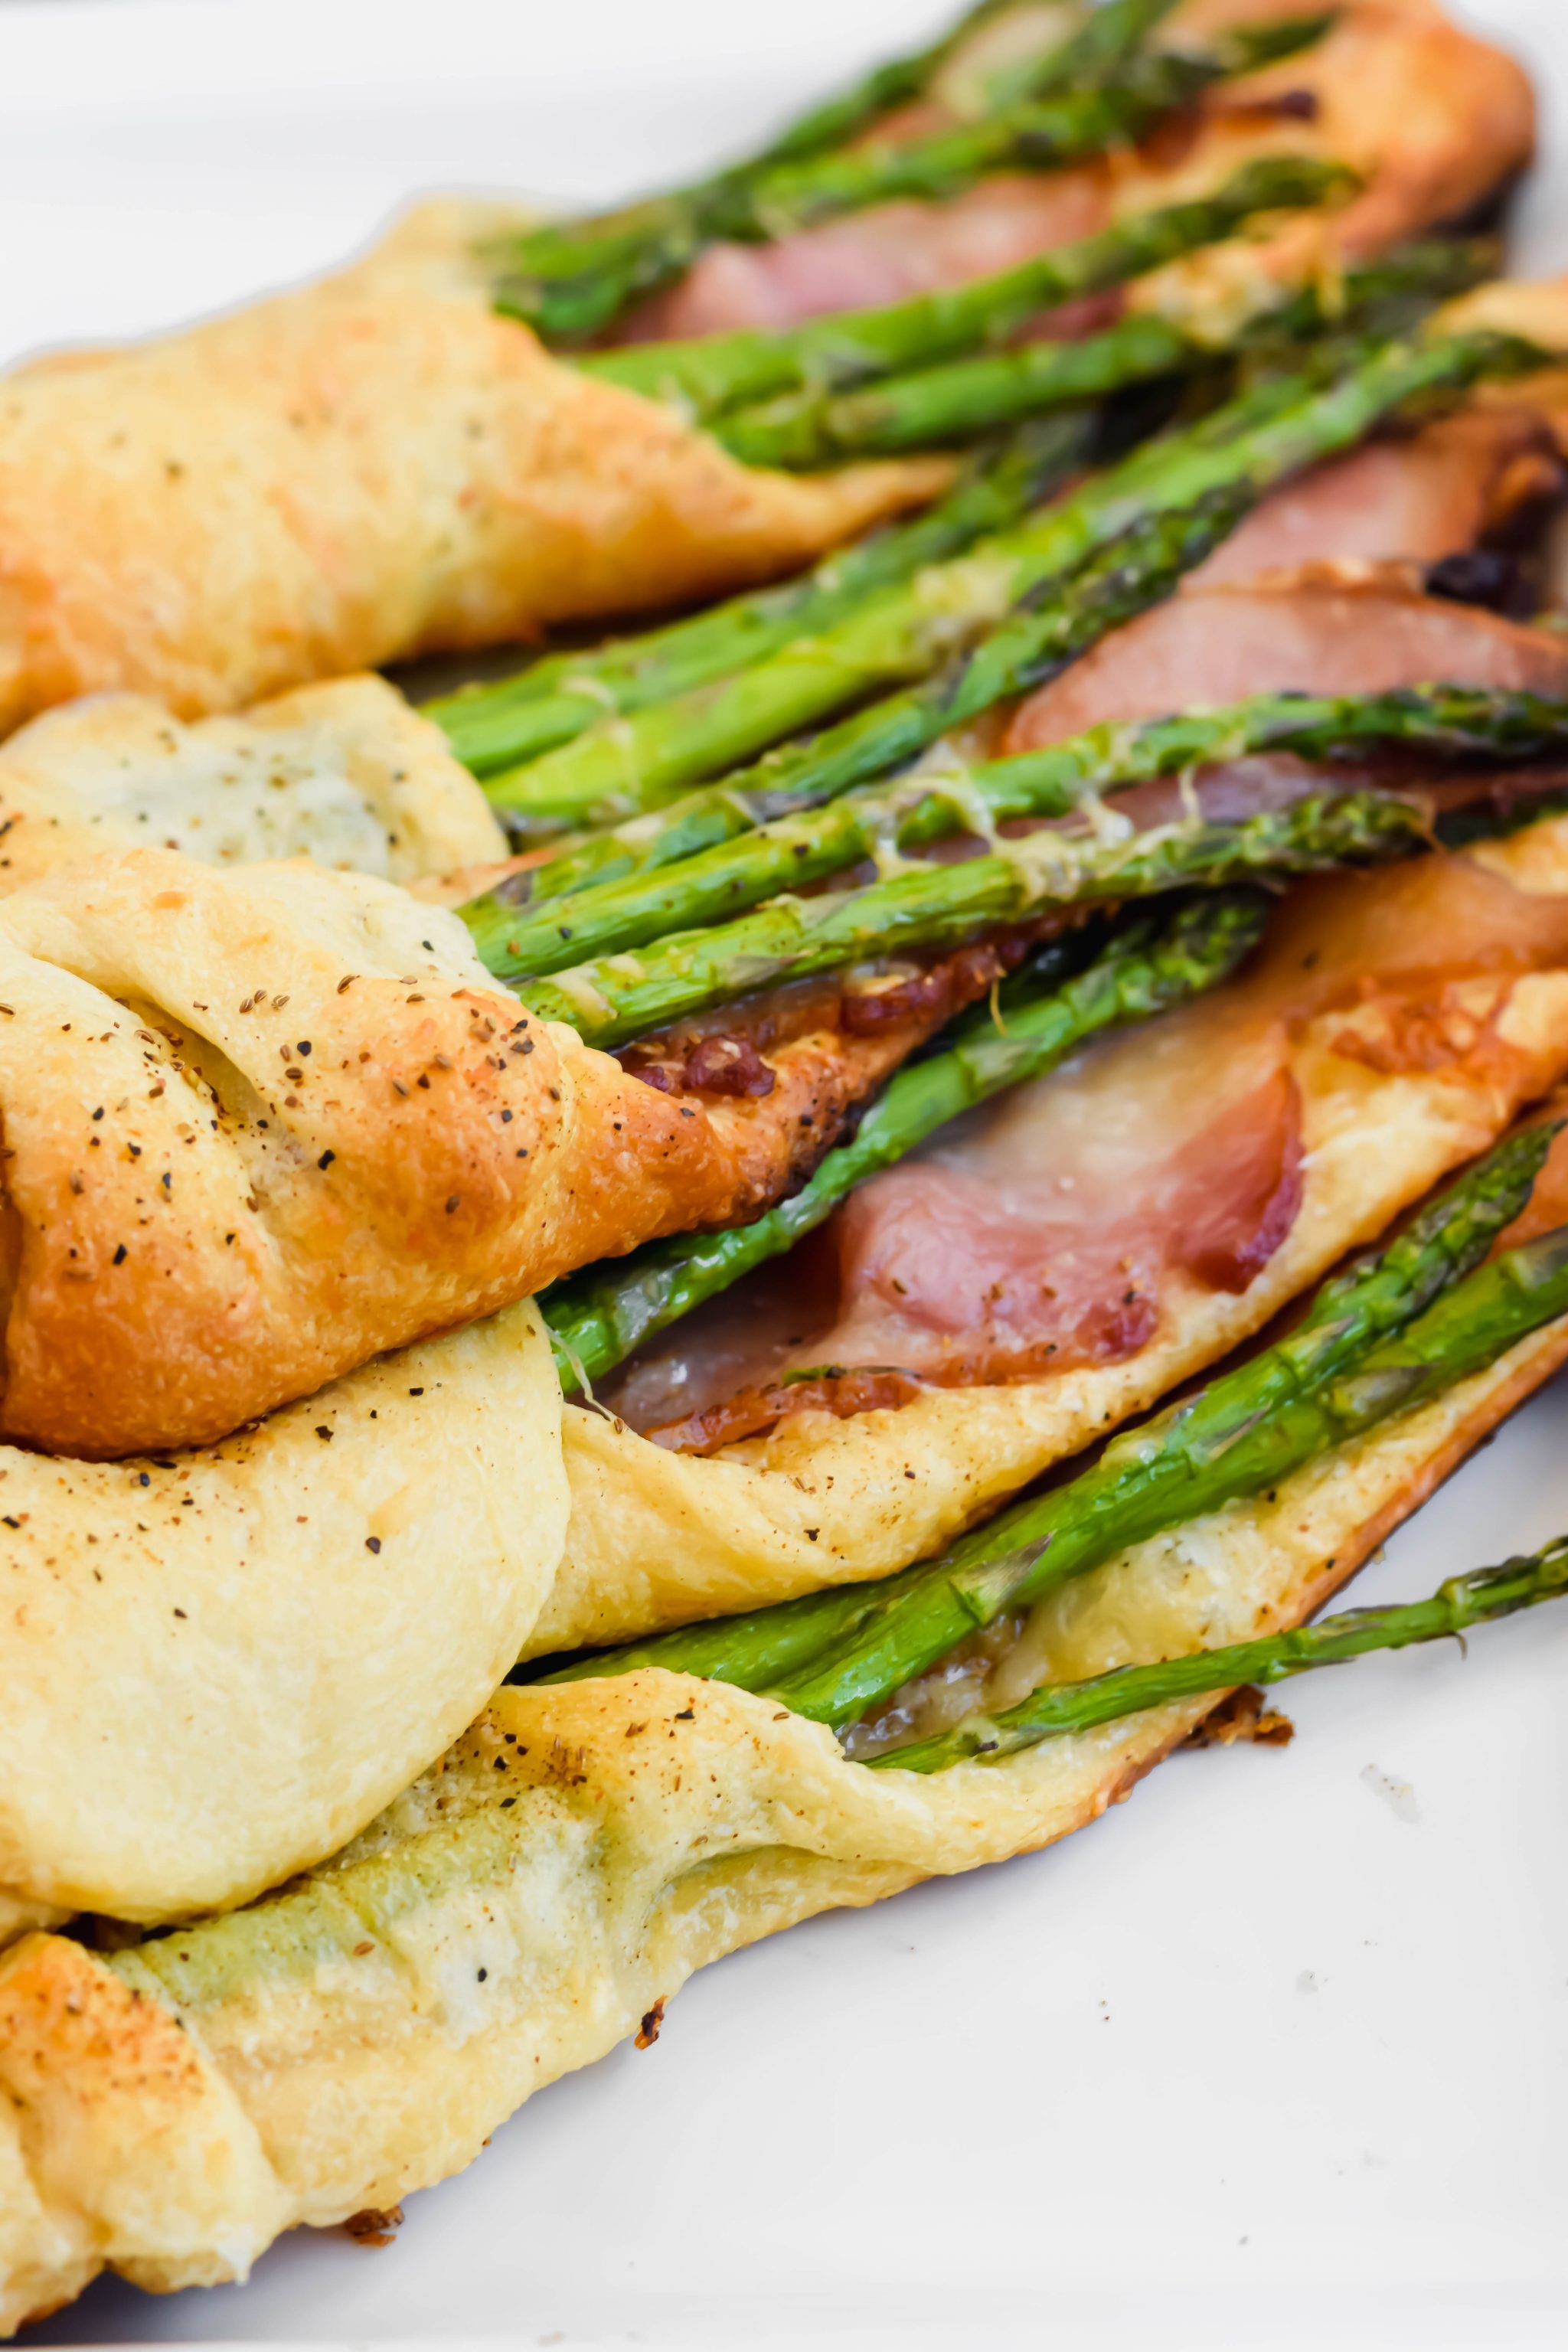 Asparagus and Bacon Pastry Pockets